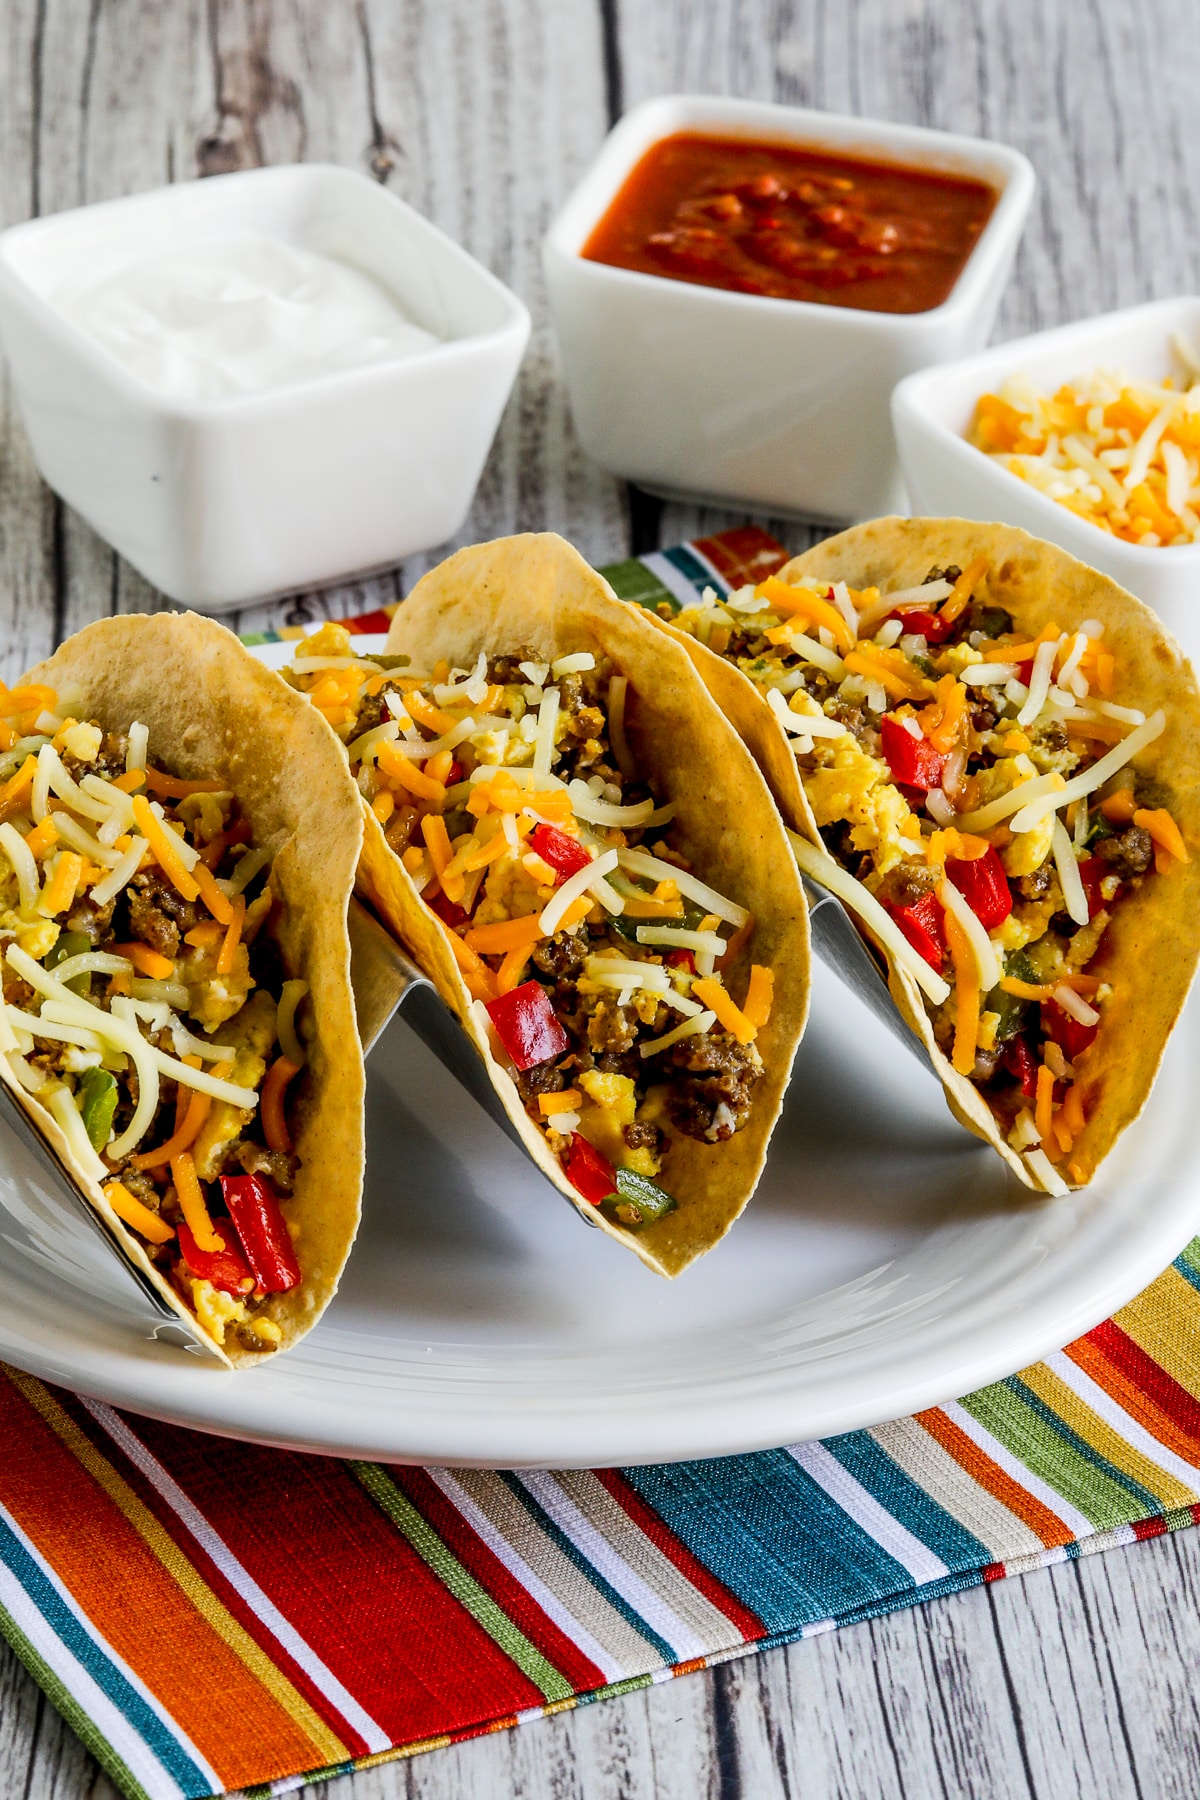 Low-Carb Breakfast Tacos recipe photo showing tacos in holder with sour cream, salsa, and cheese in back.